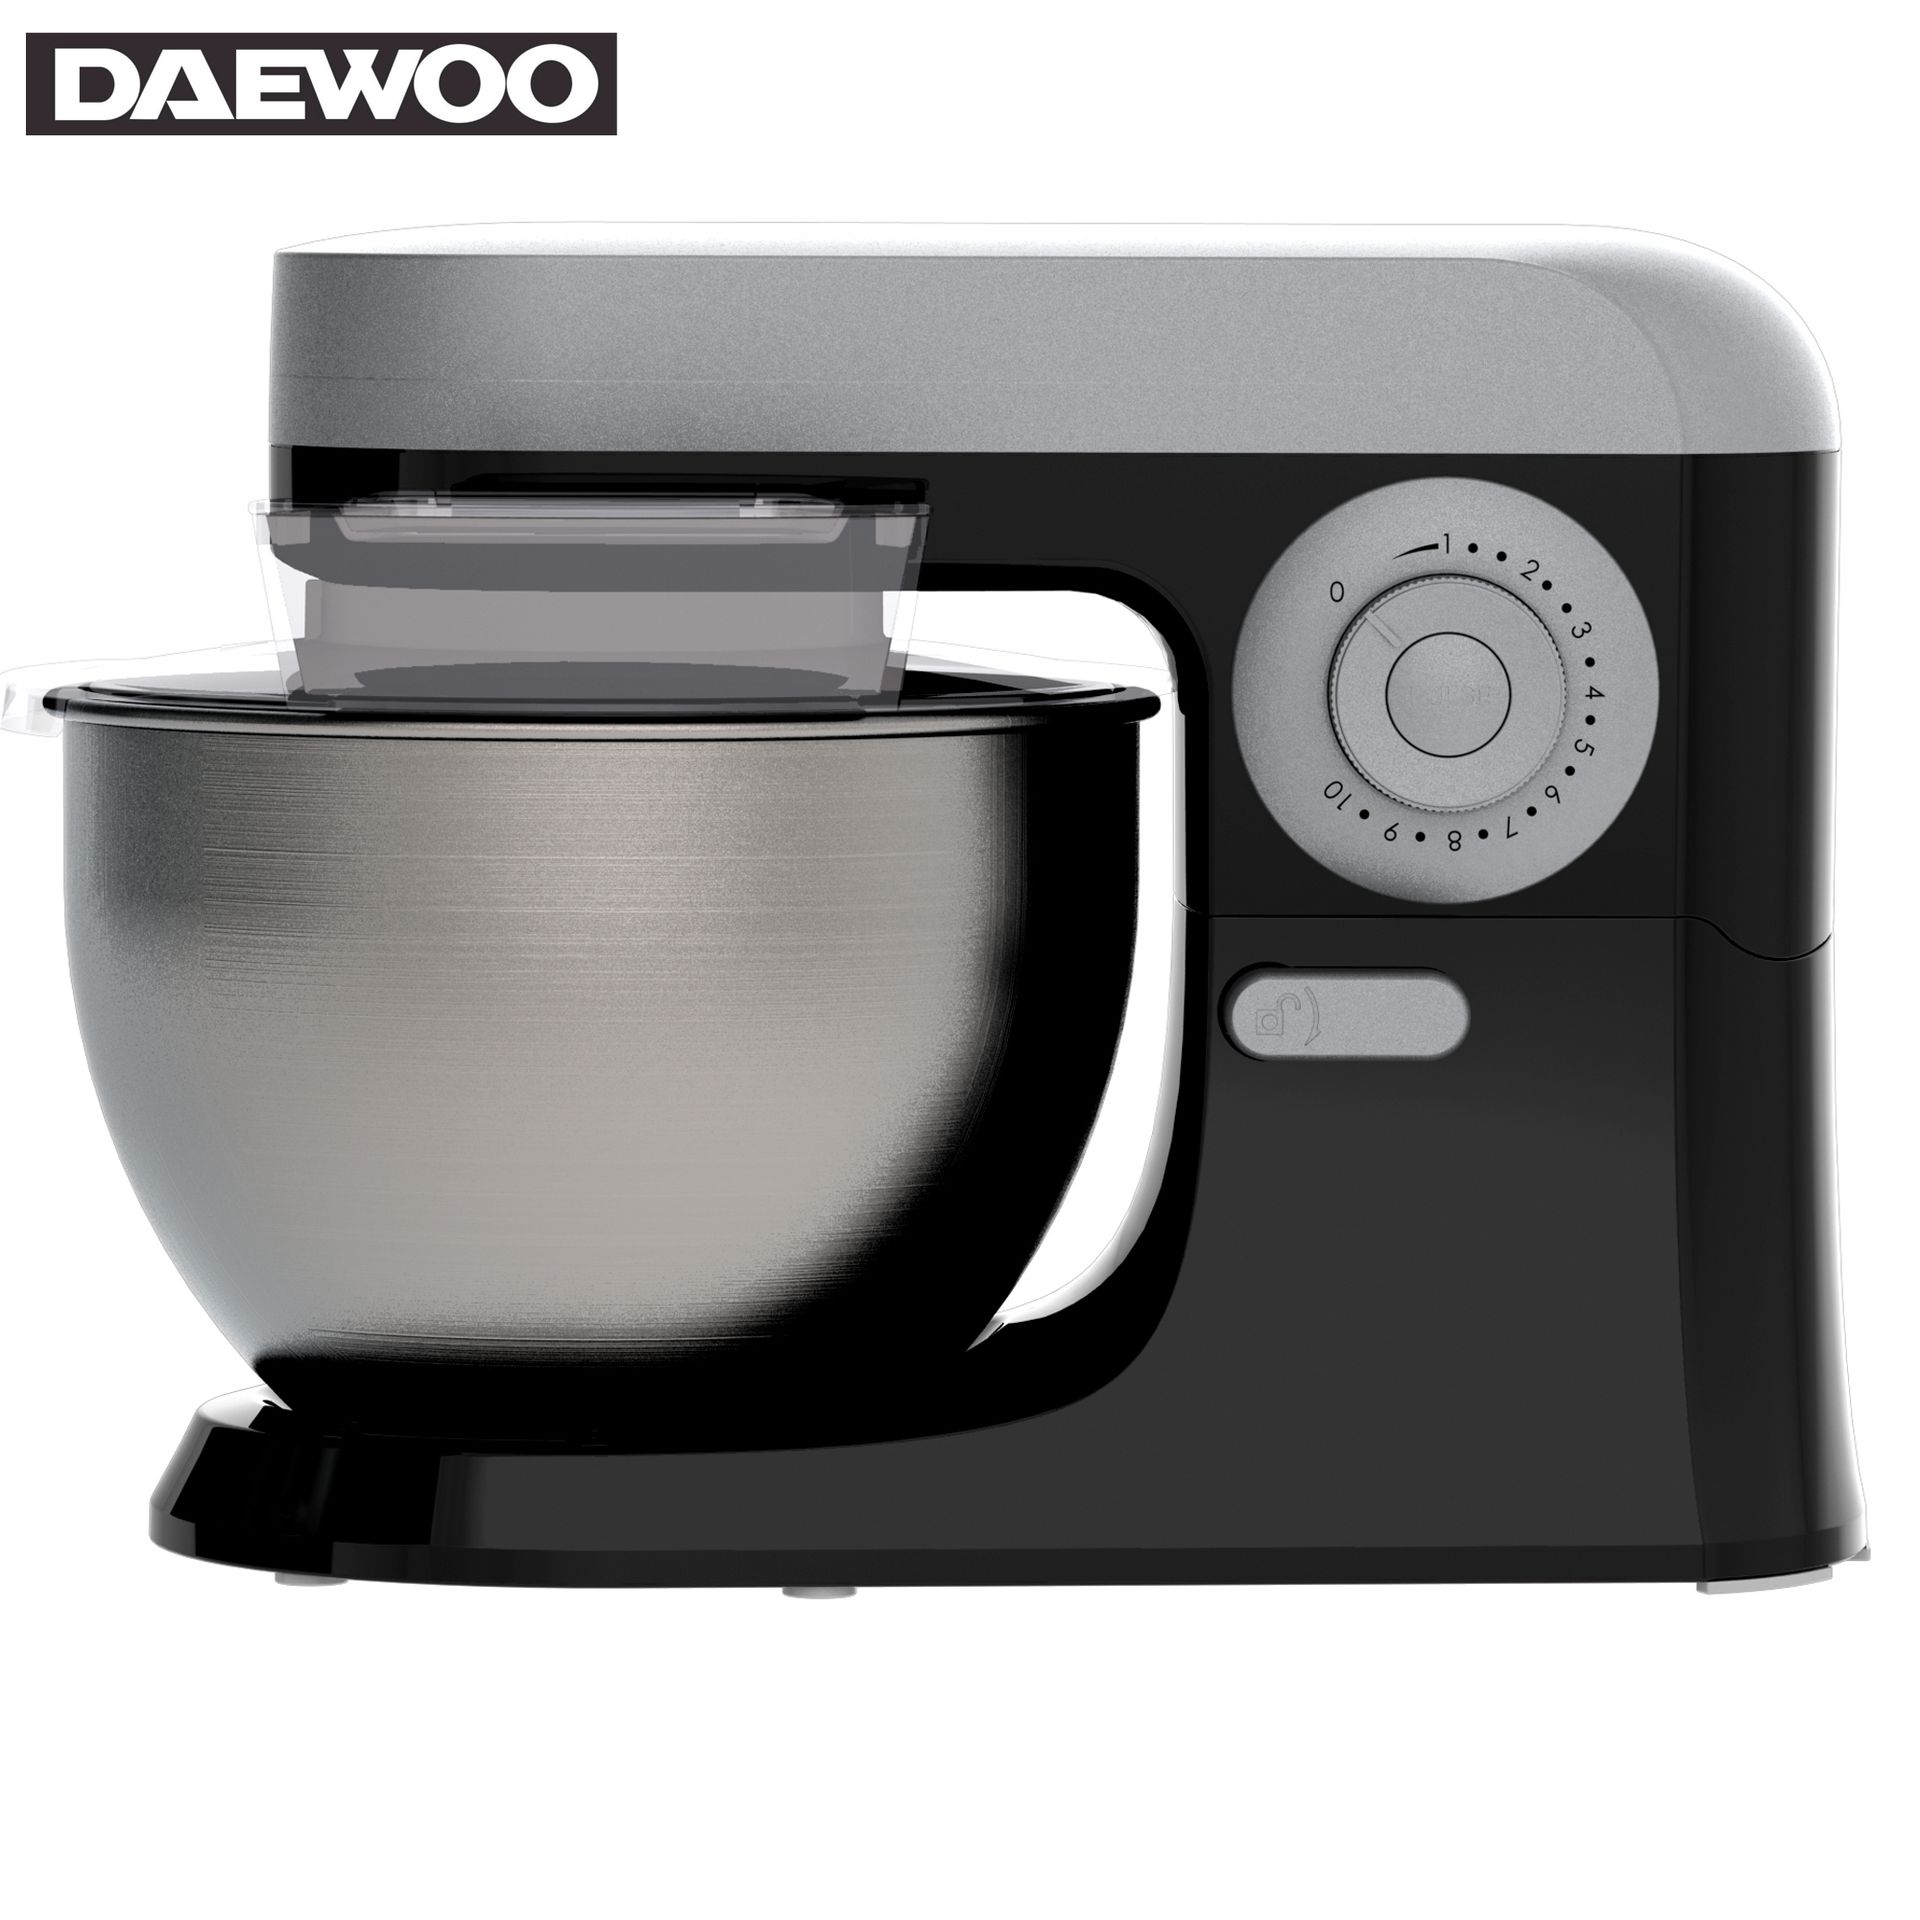 DAEWOO . Robot Culinaire 1410 
Stainless steel bowl
Content: 5L
Mixing hook
Doug&hellip;